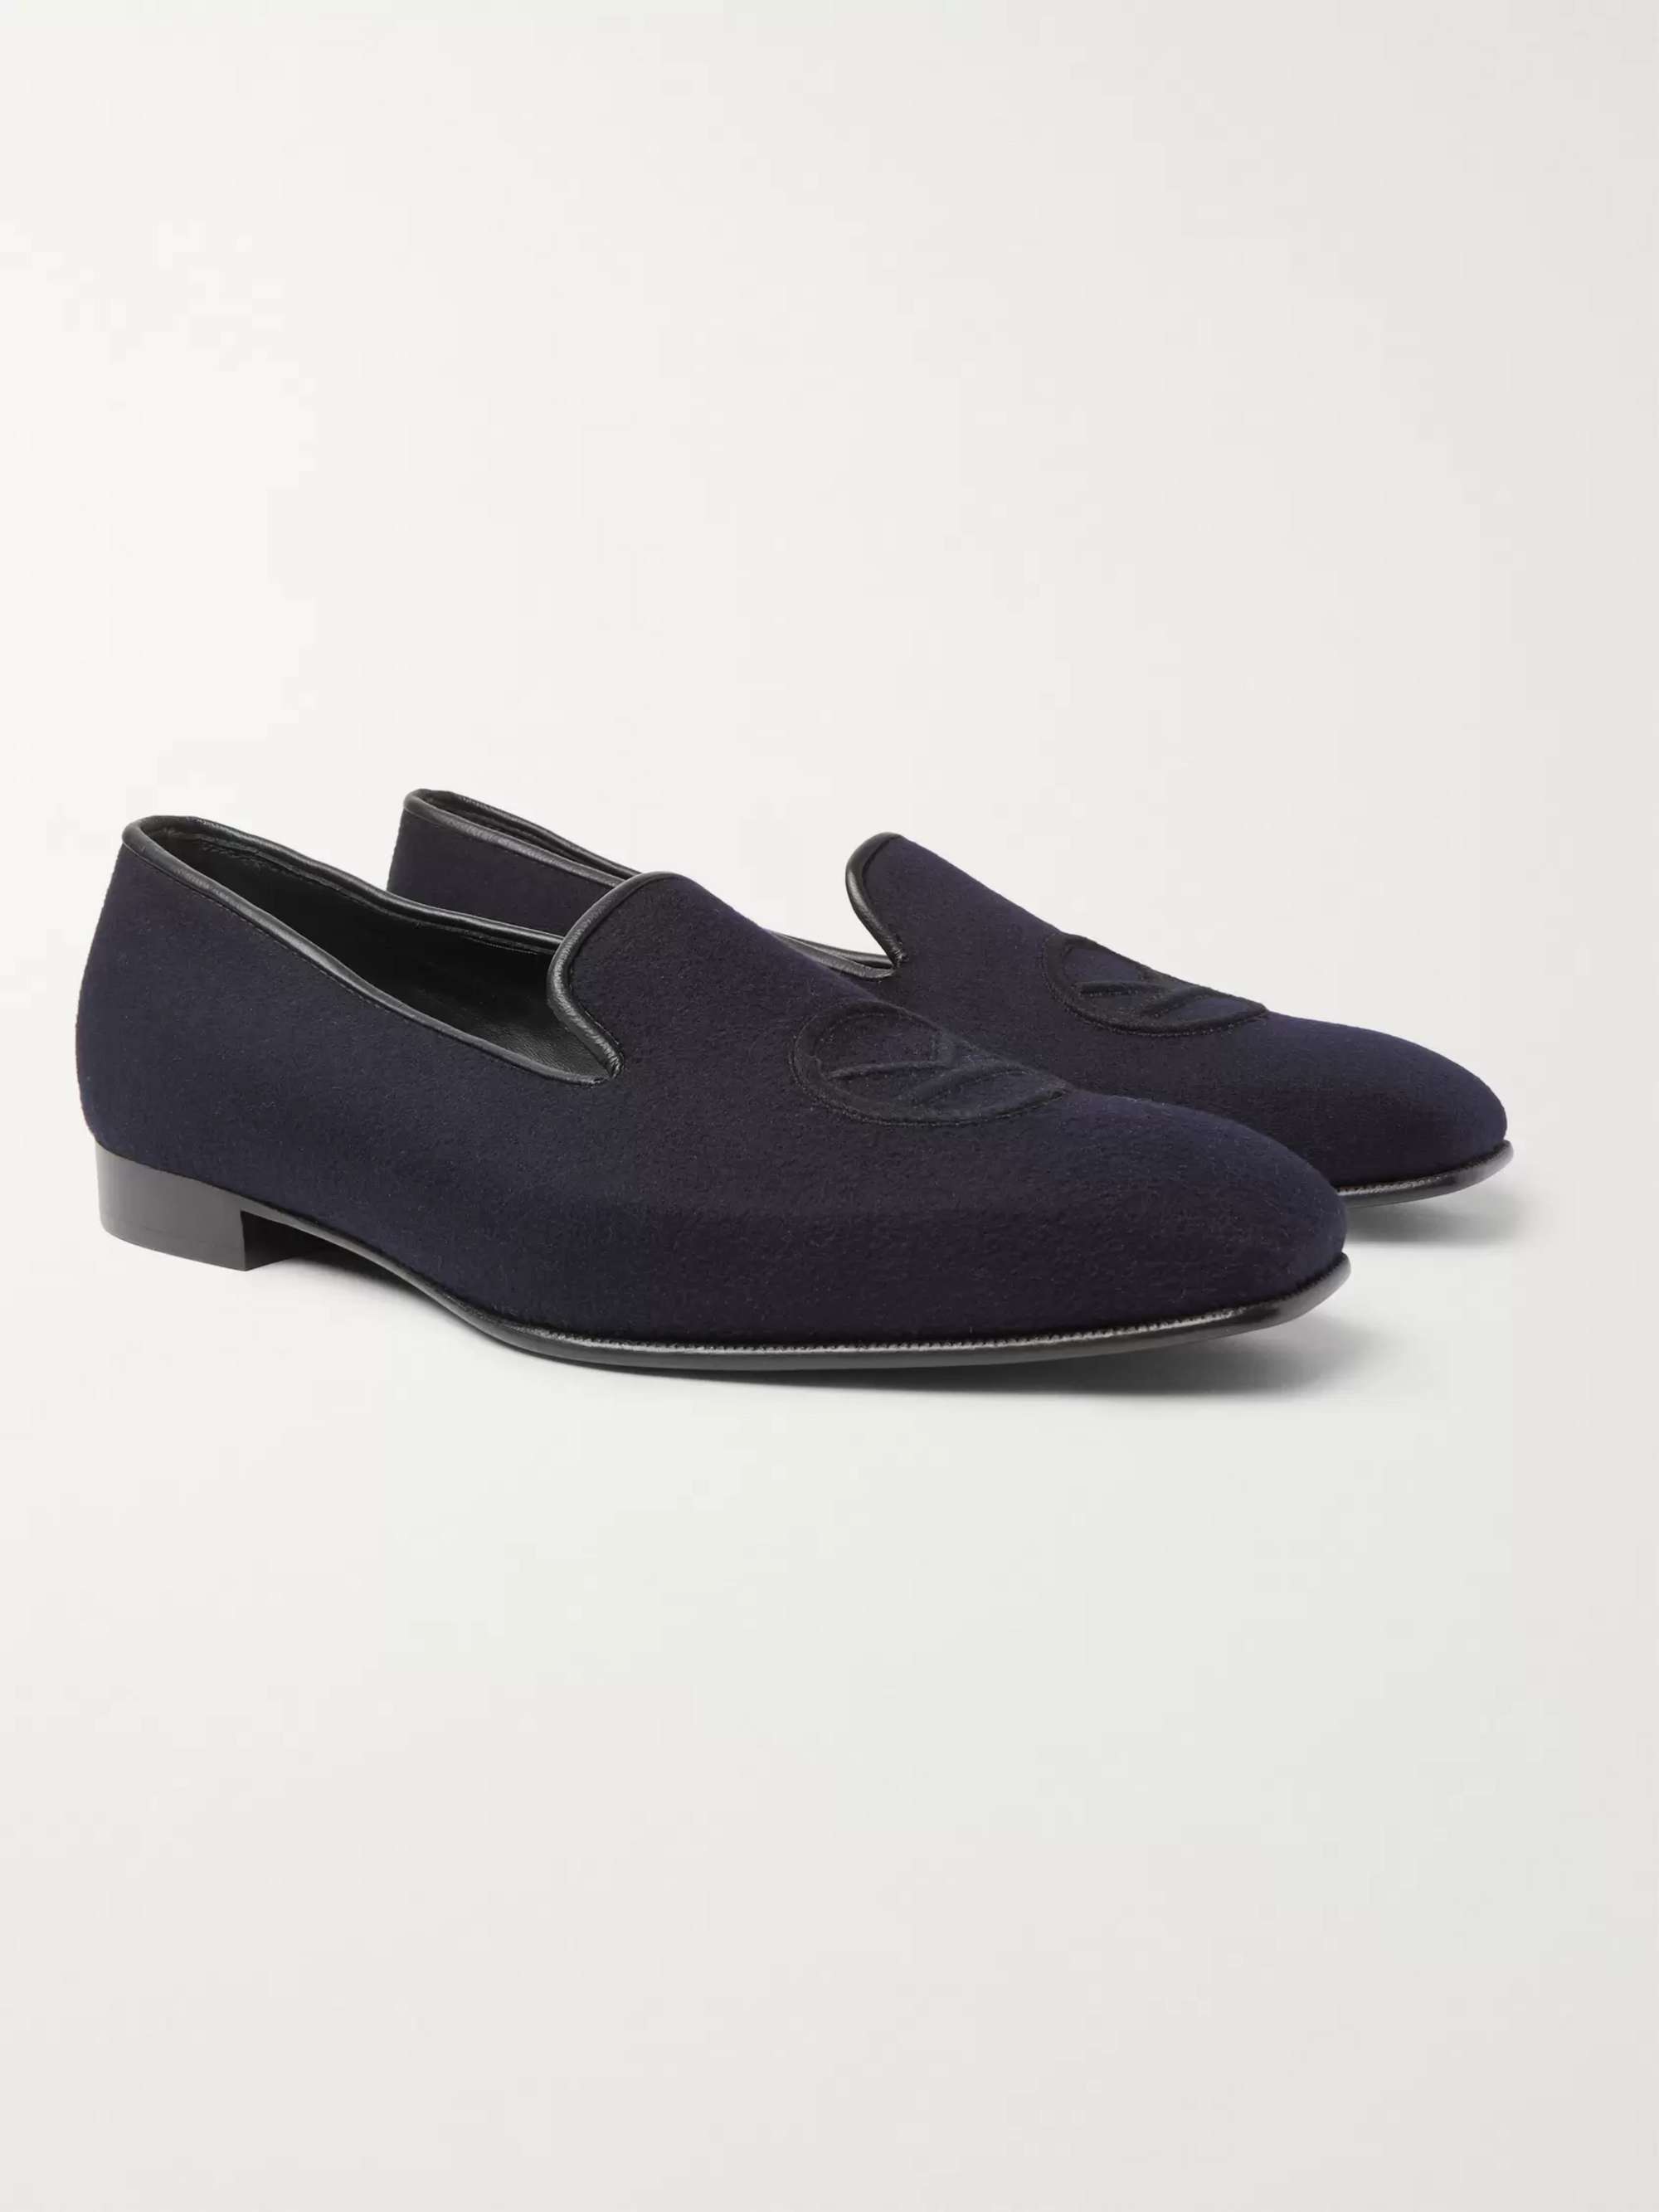 KINGSMAN + George Cleverley Windsor Leather-Trimmed Embroidered Cashmere Slippers